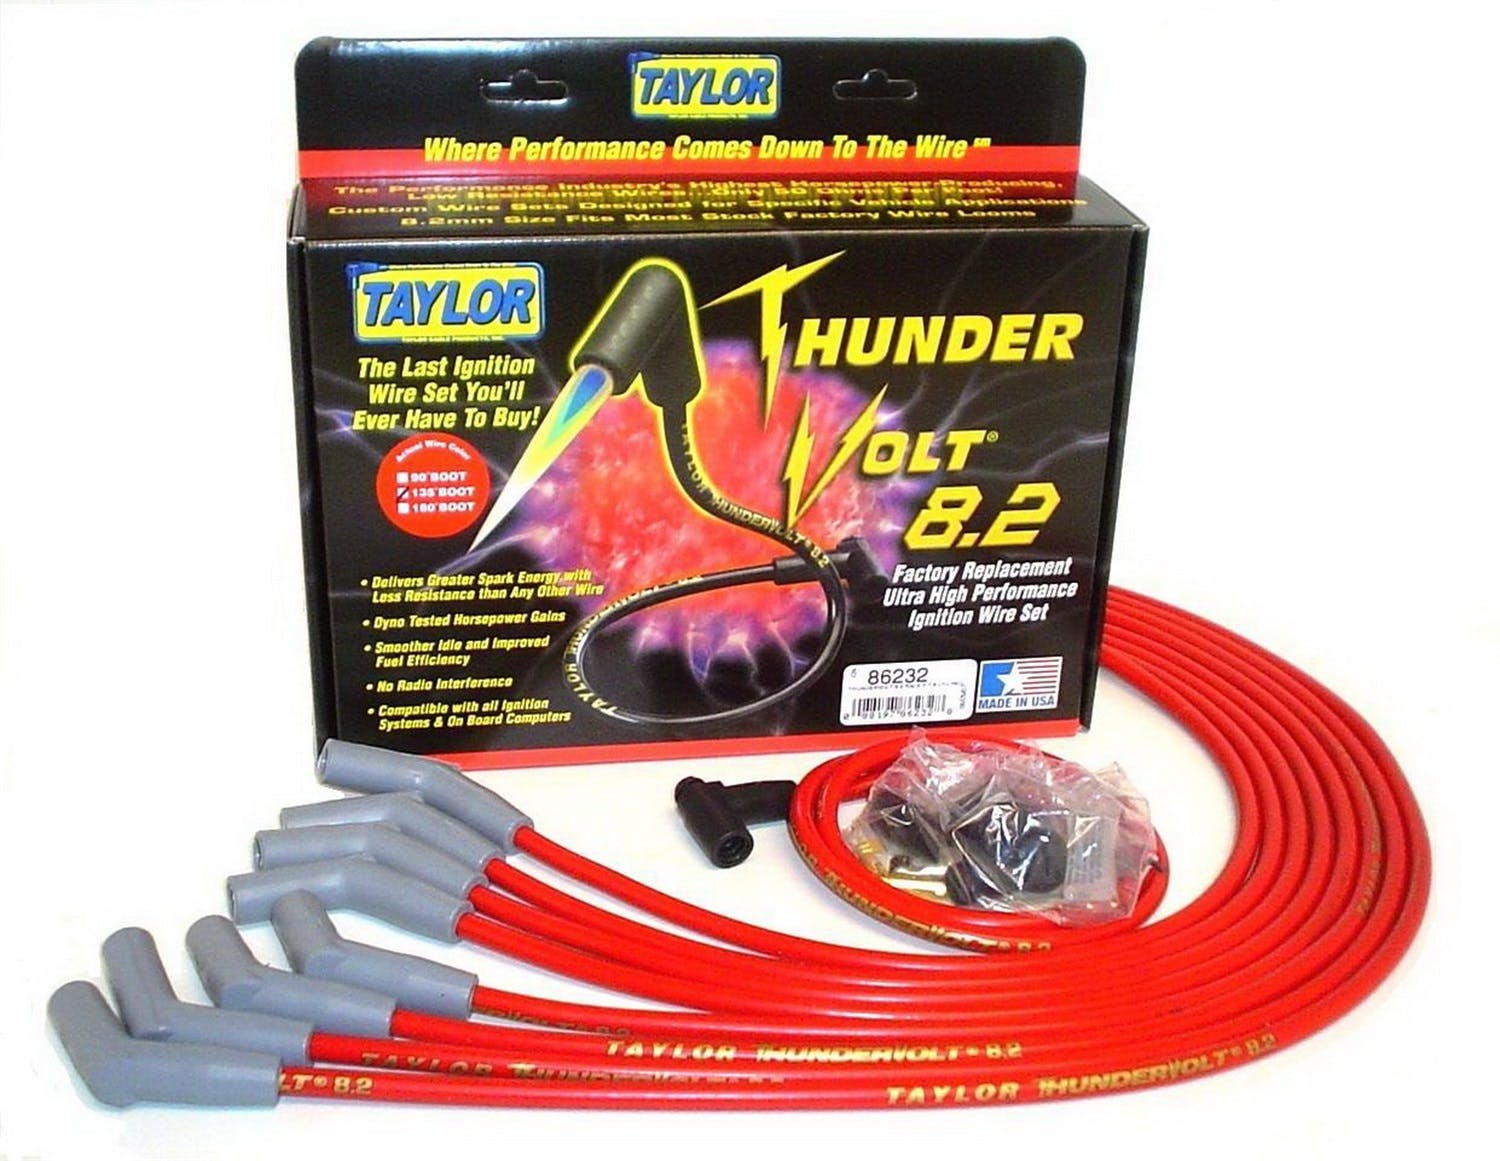 Taylor Cable Products 86232 Thundervolt 8.2 race fit 8 cyl red